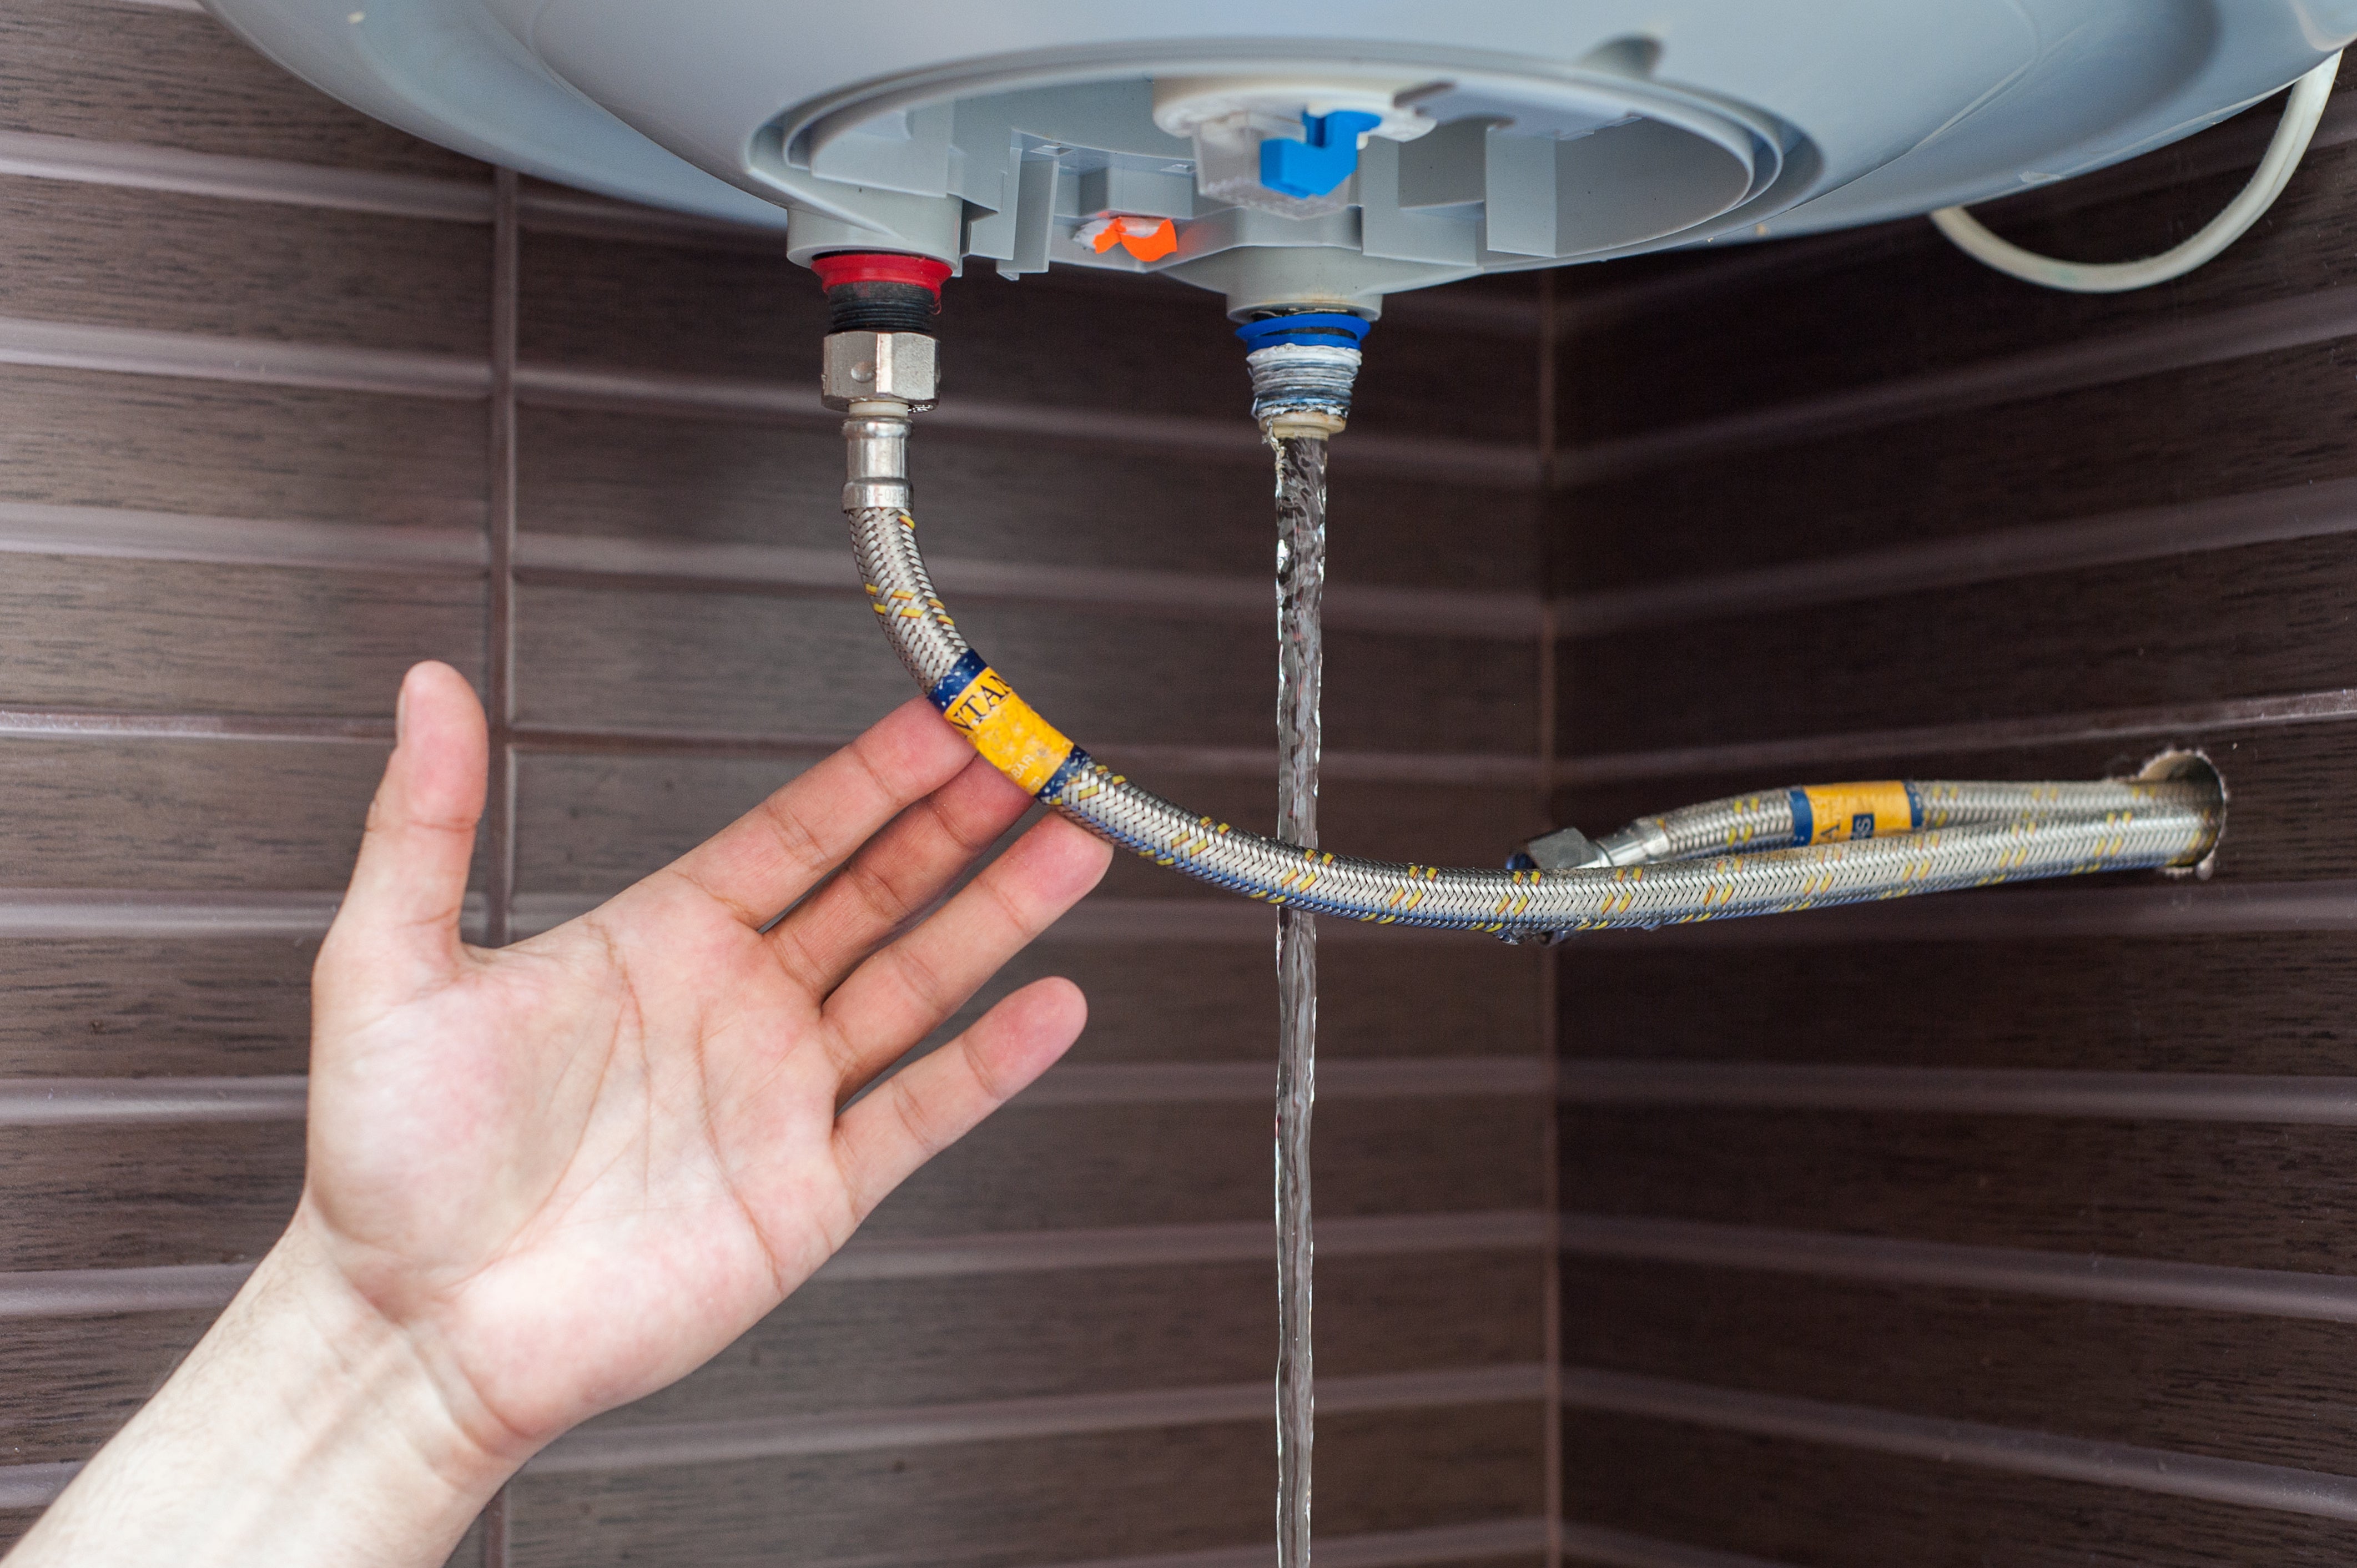 Why Is Water Heater Supply Line Hot? - Building Advisor